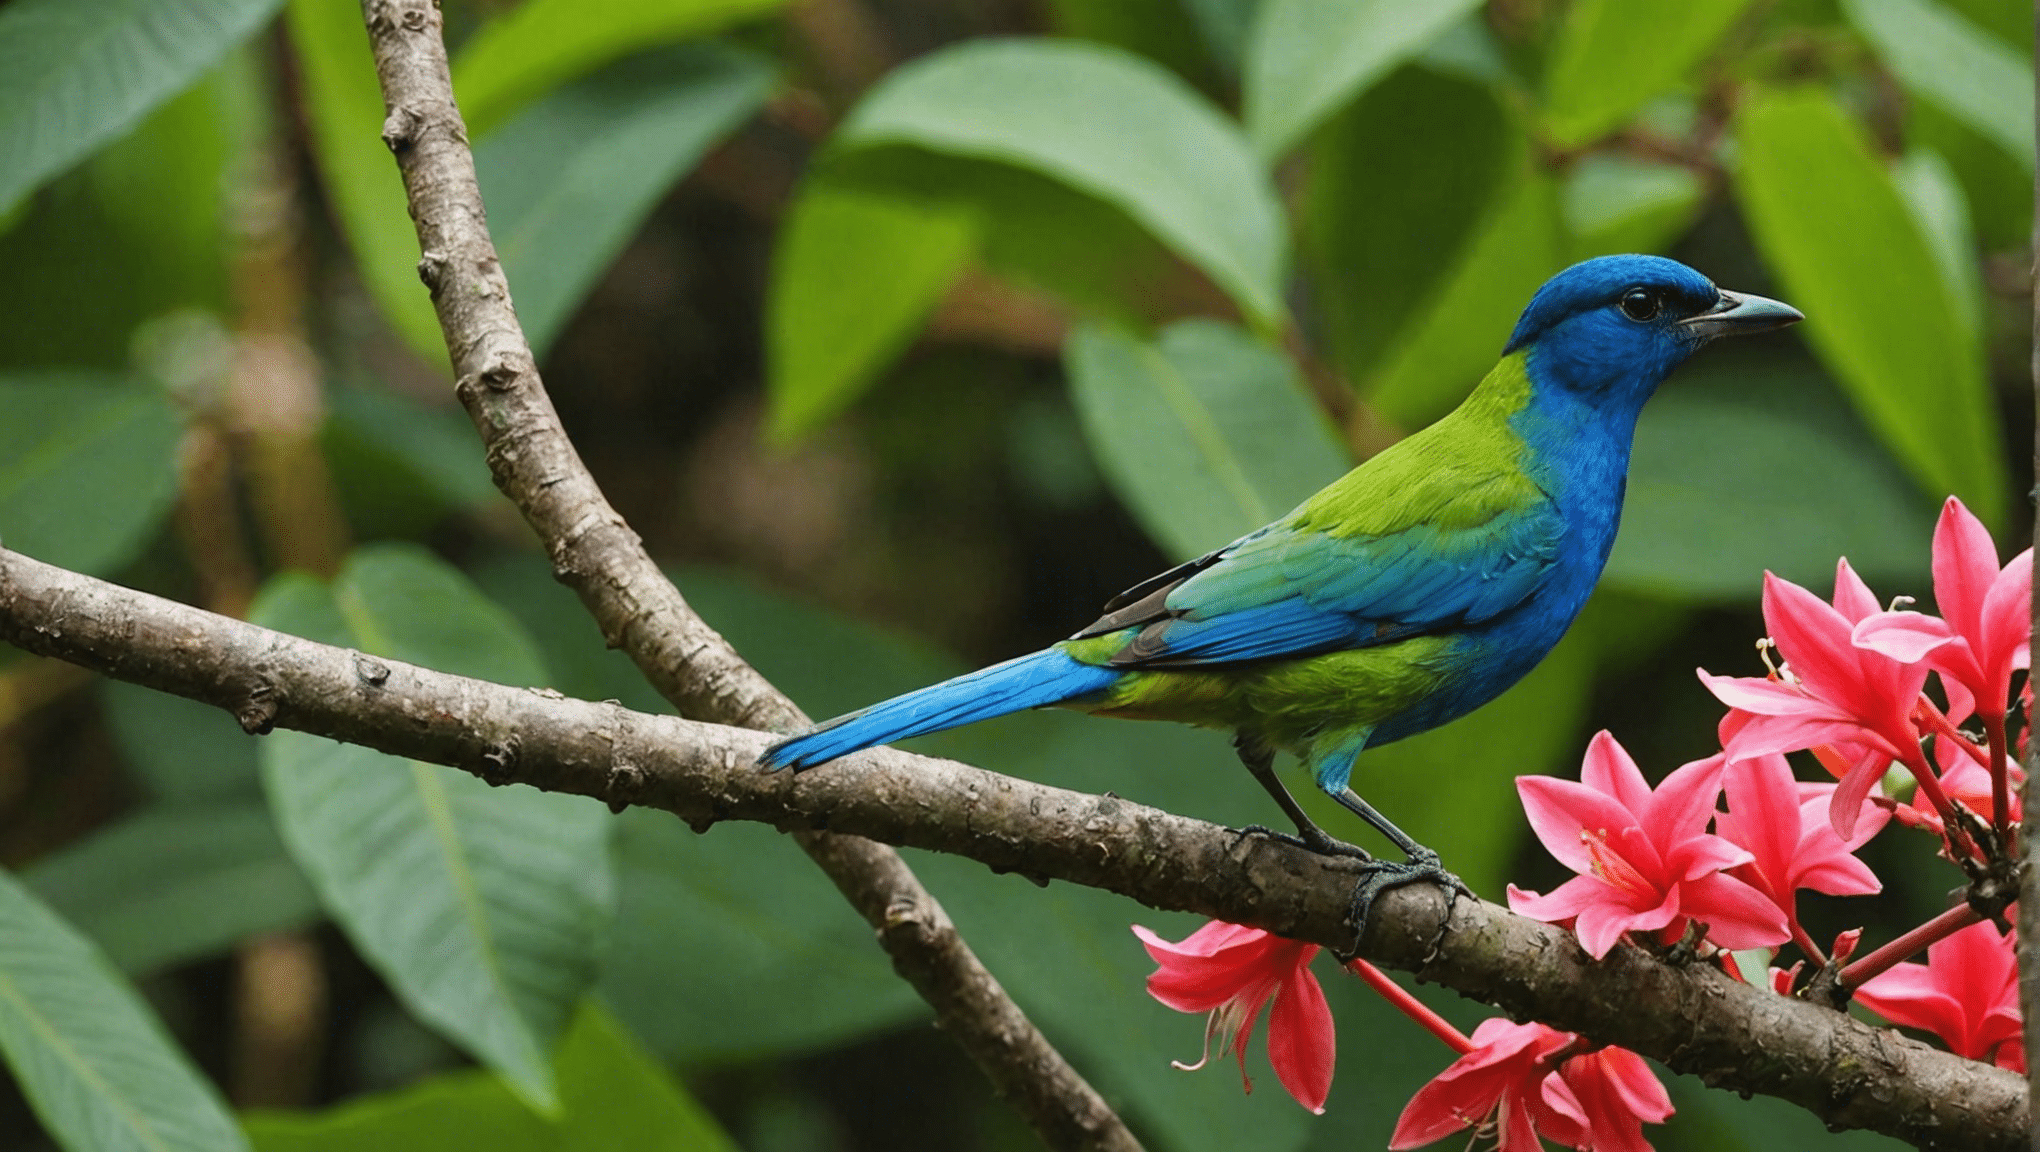 discover the unique and diverse bird species found only in hawaii. from colorful honeycreepers to the majestic hawaiian hawk, learn about the fascinating avian diversity of the islands.